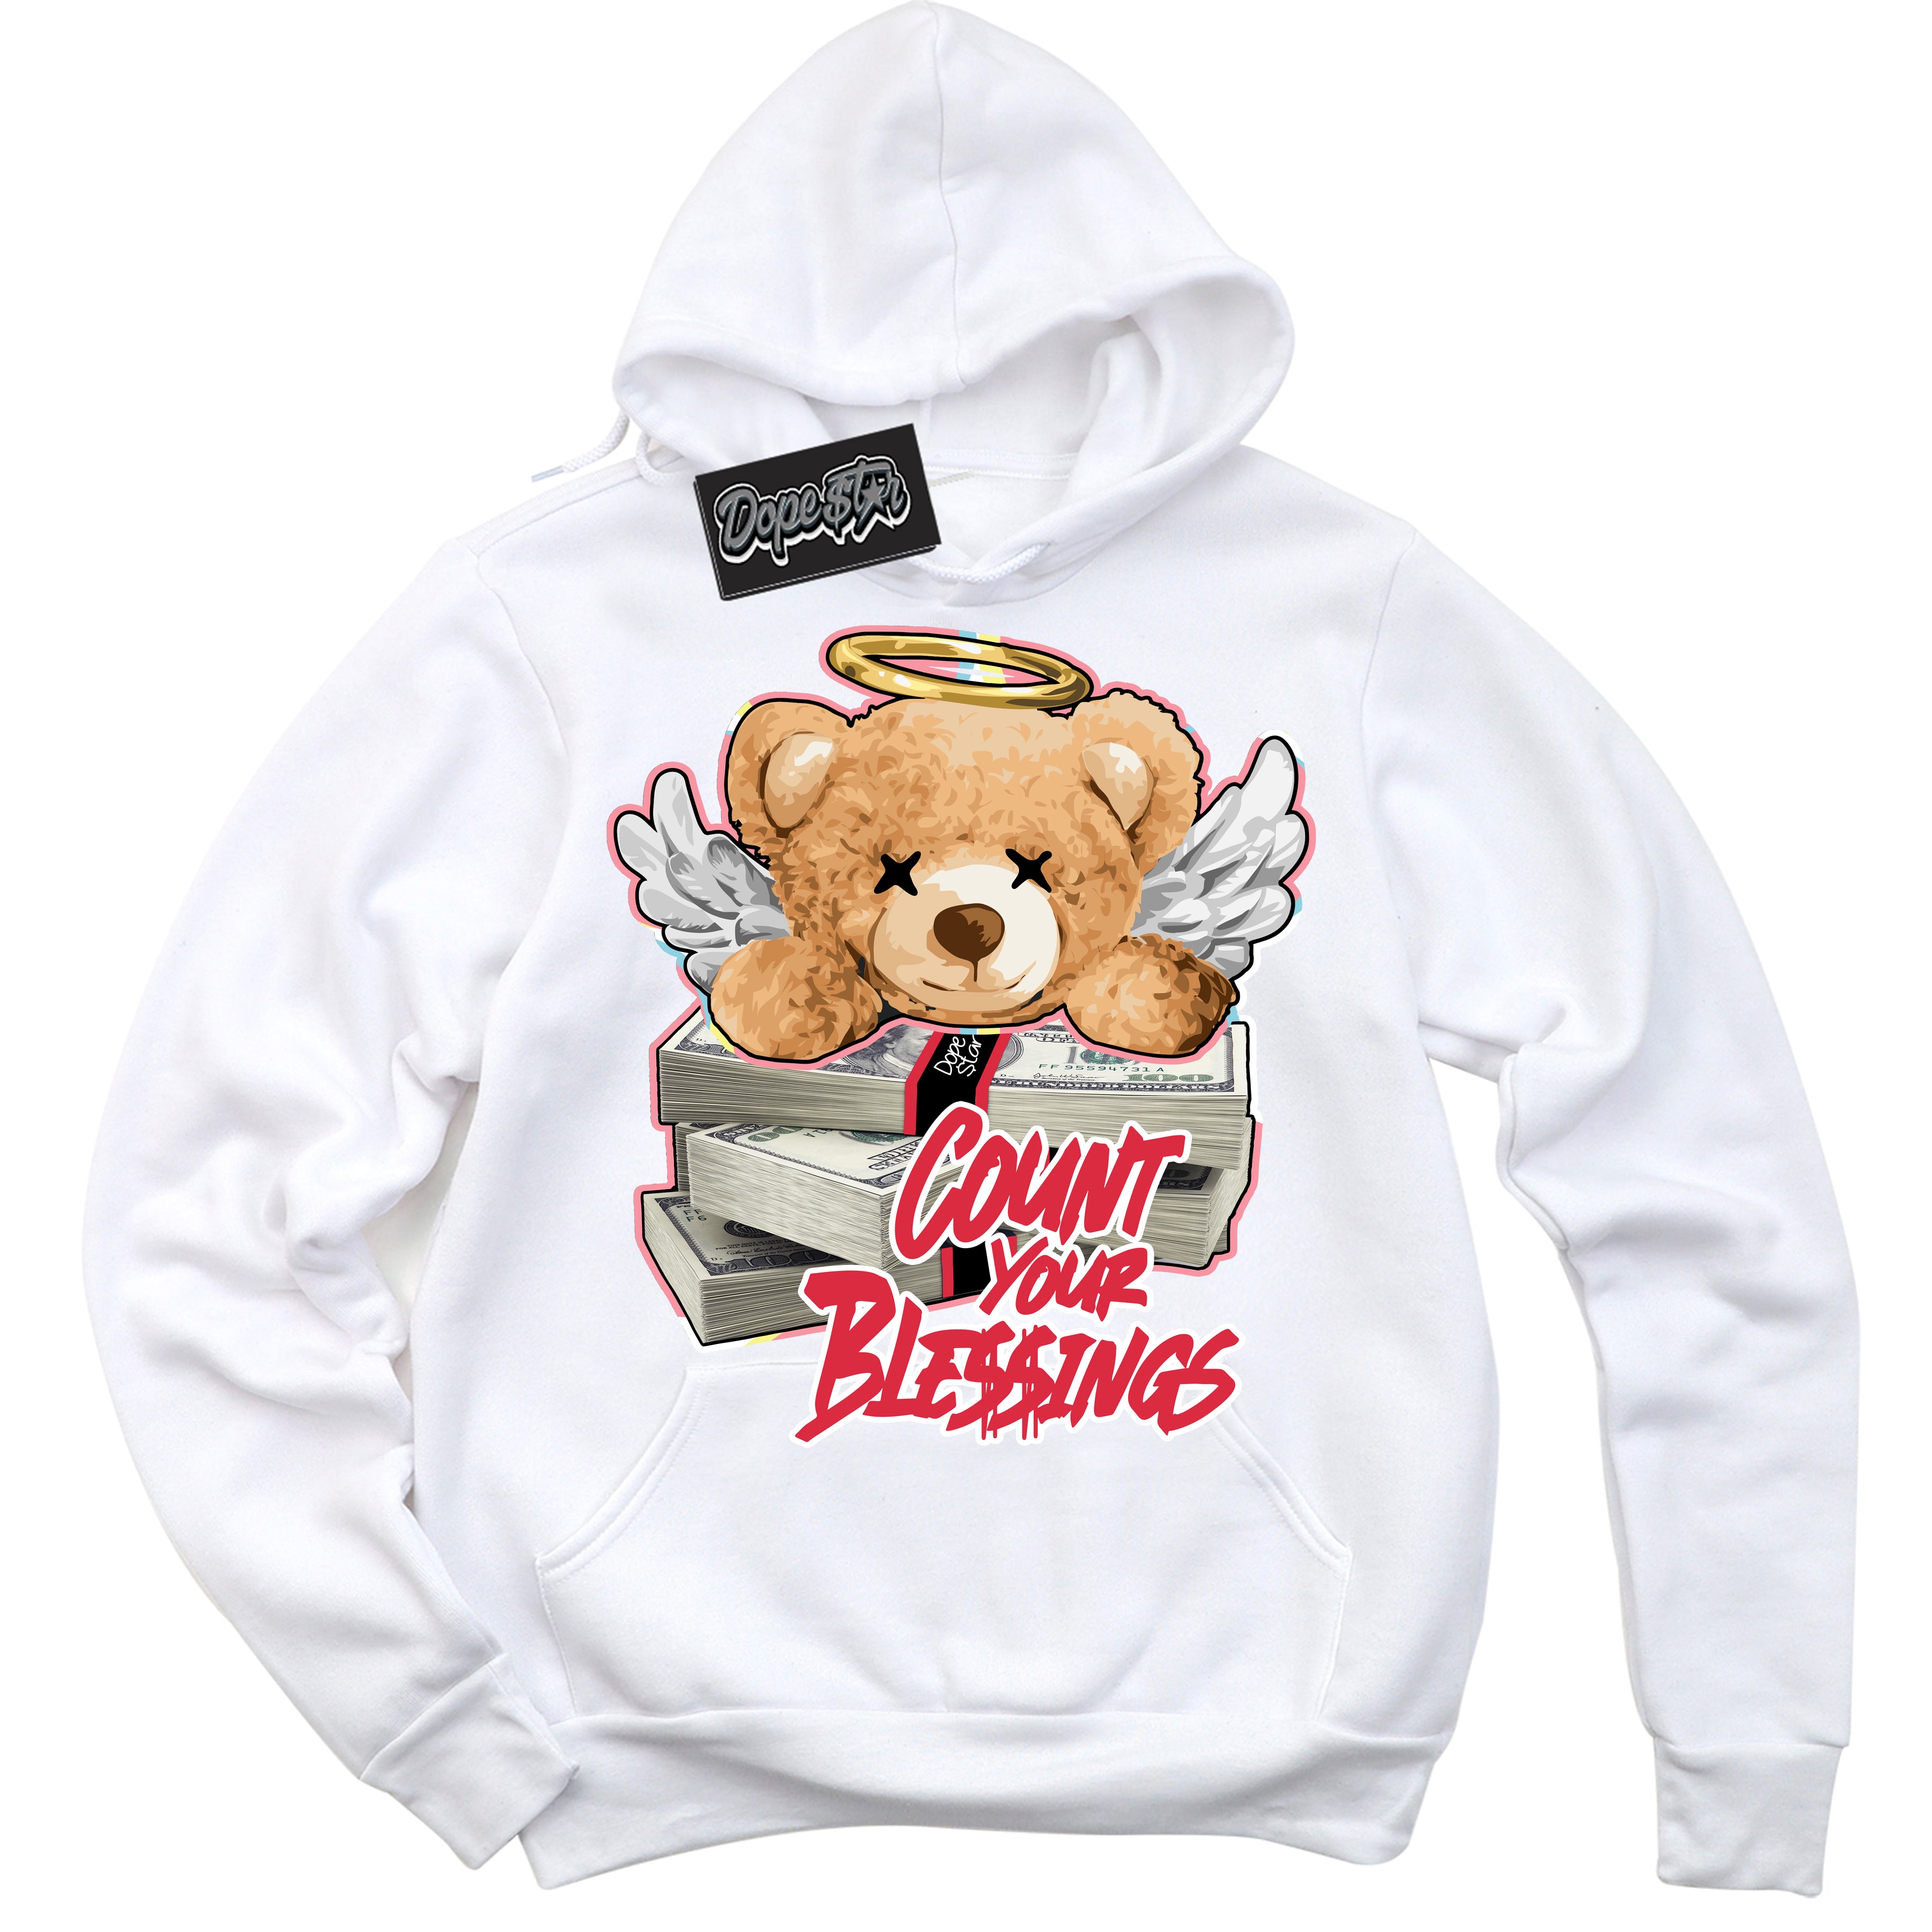 Cool White Graphic DopeStar Hoodie with “ Count Your Blessings “ print, that perfectly matches Spider-Verse 1s sneakers